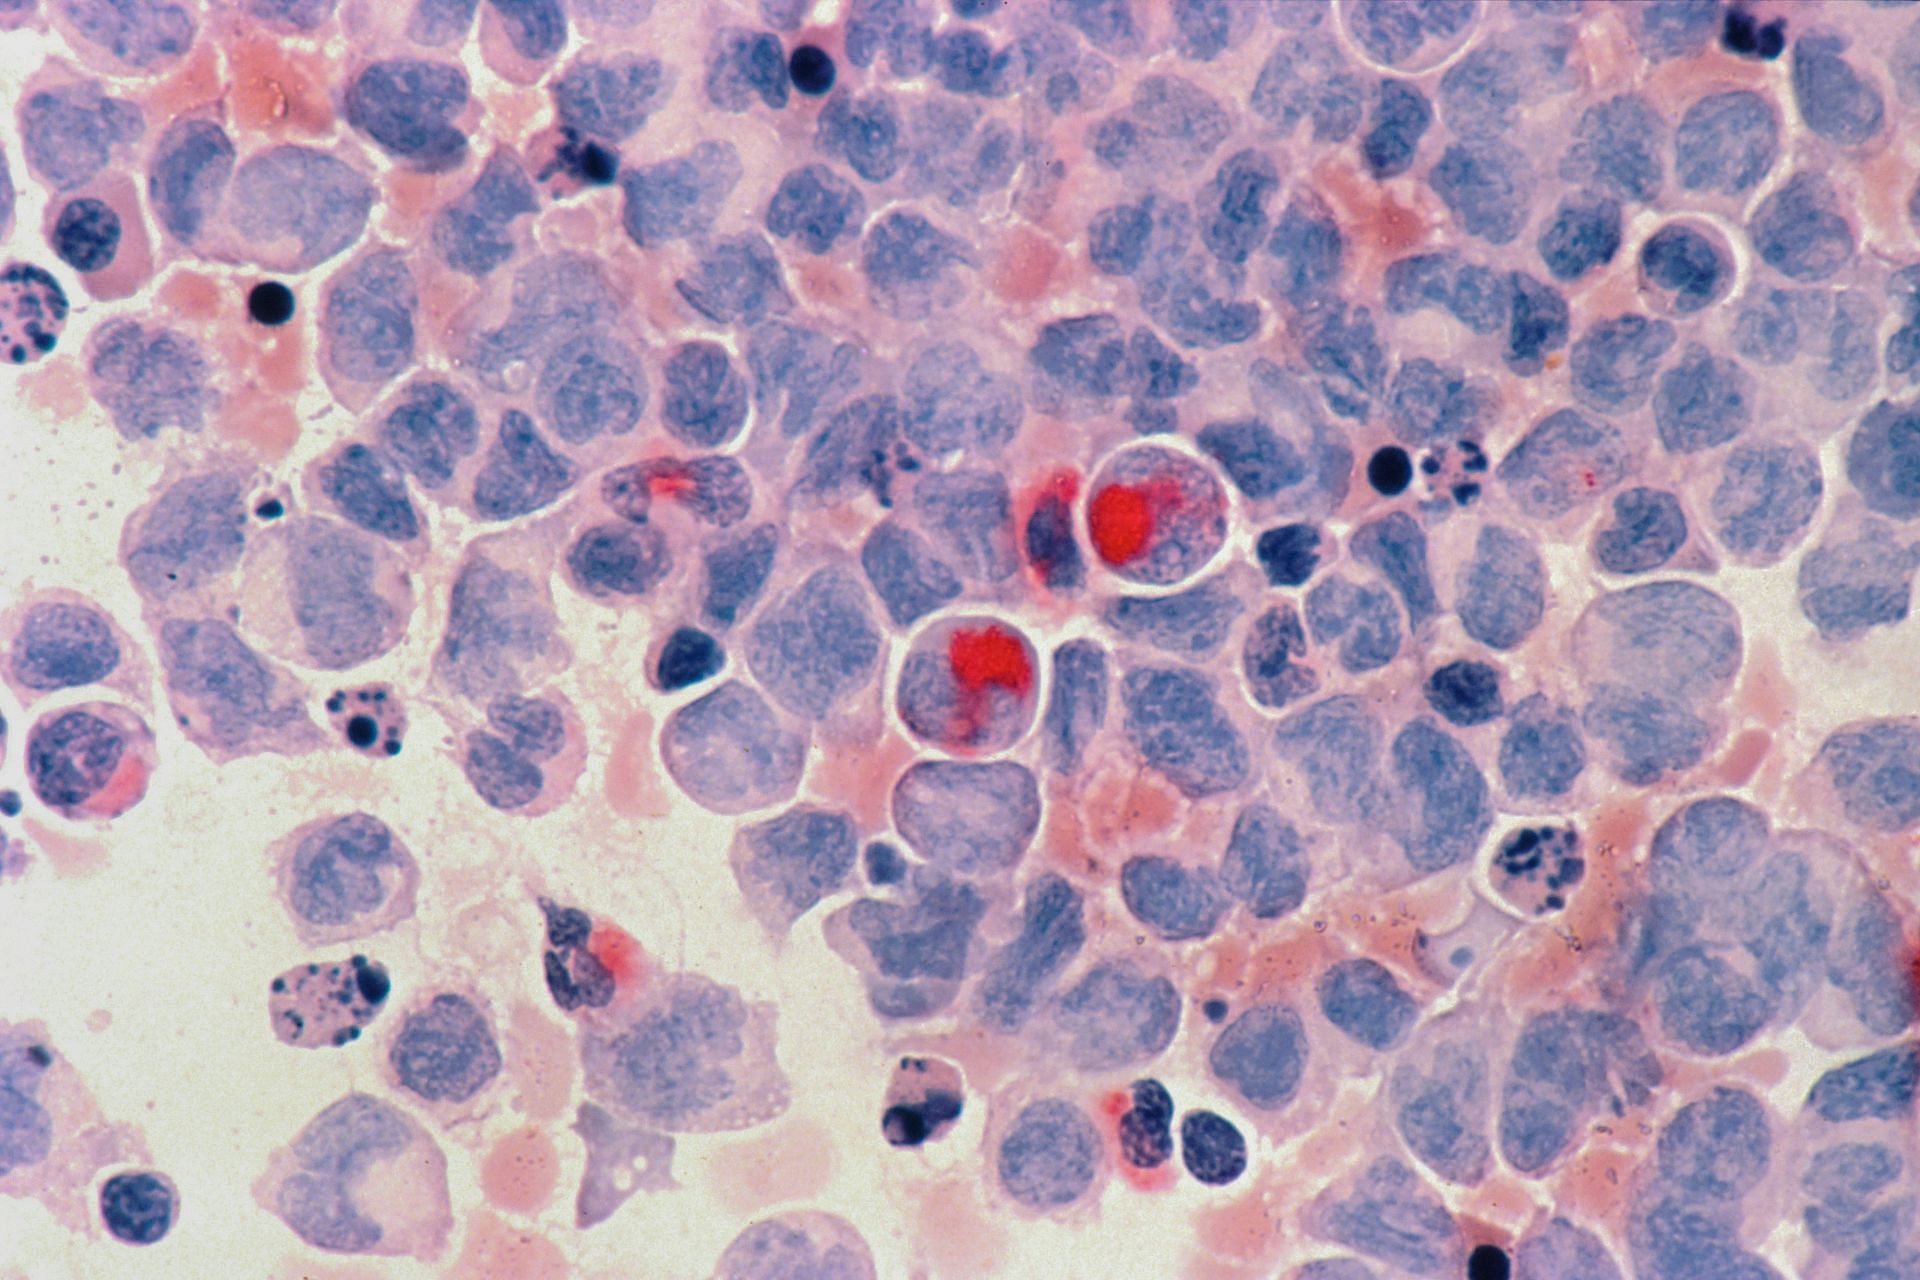 Cancer of the blood cells (Image by NCI/Unsplash)